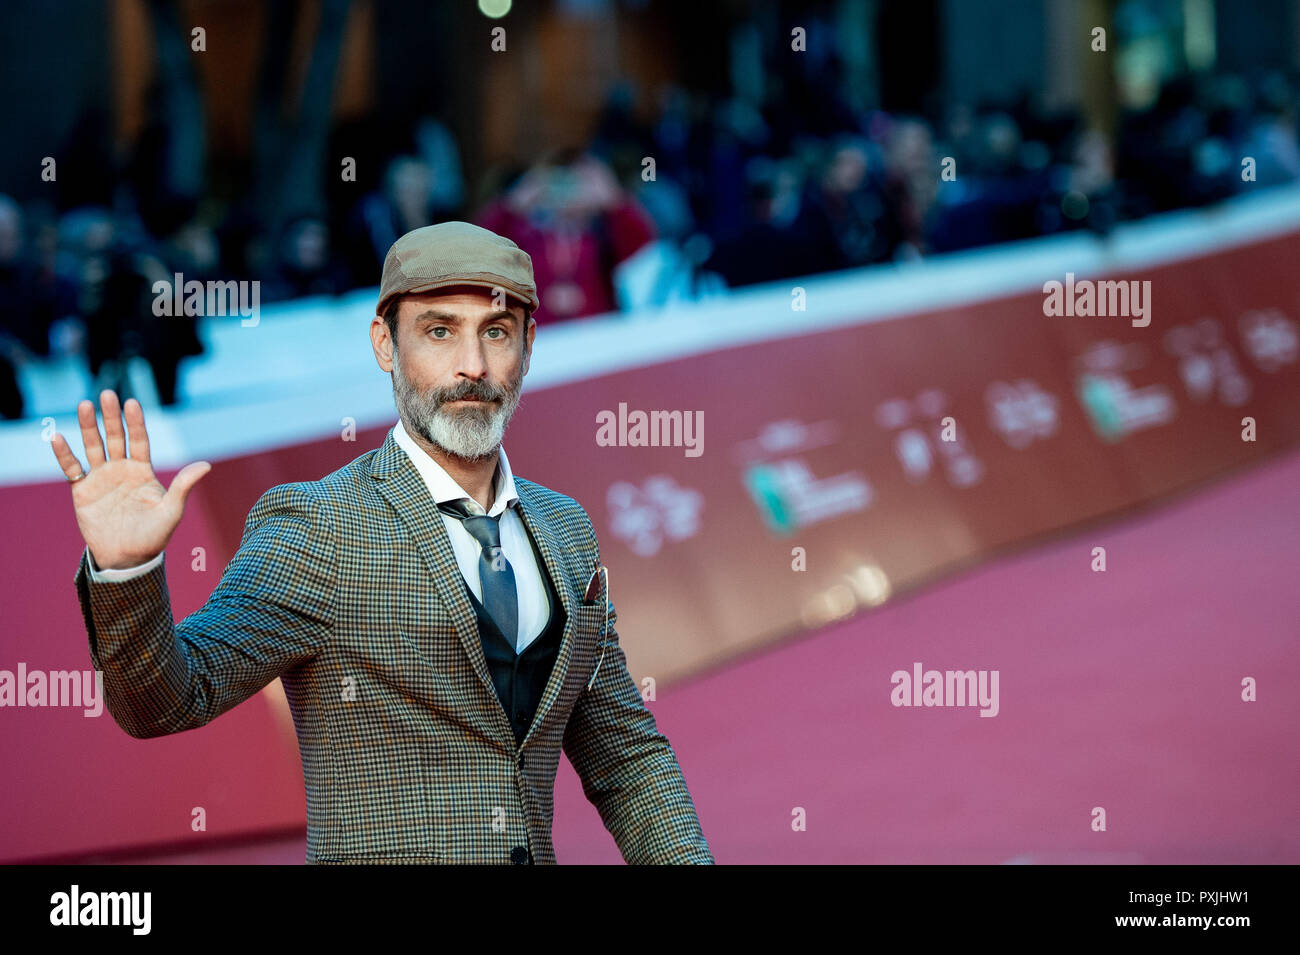 Rome, Italy, 22nd October, 2018. Actor and model Raz Degan attends the Red Carpet during the 13th Rome Film Fest at Auditorium Parco Della Musica on 22 October 2018.. Photo by Giuseppe Maffia Credit: Giuseppe Maffia/Alamy Live News Stock Photo